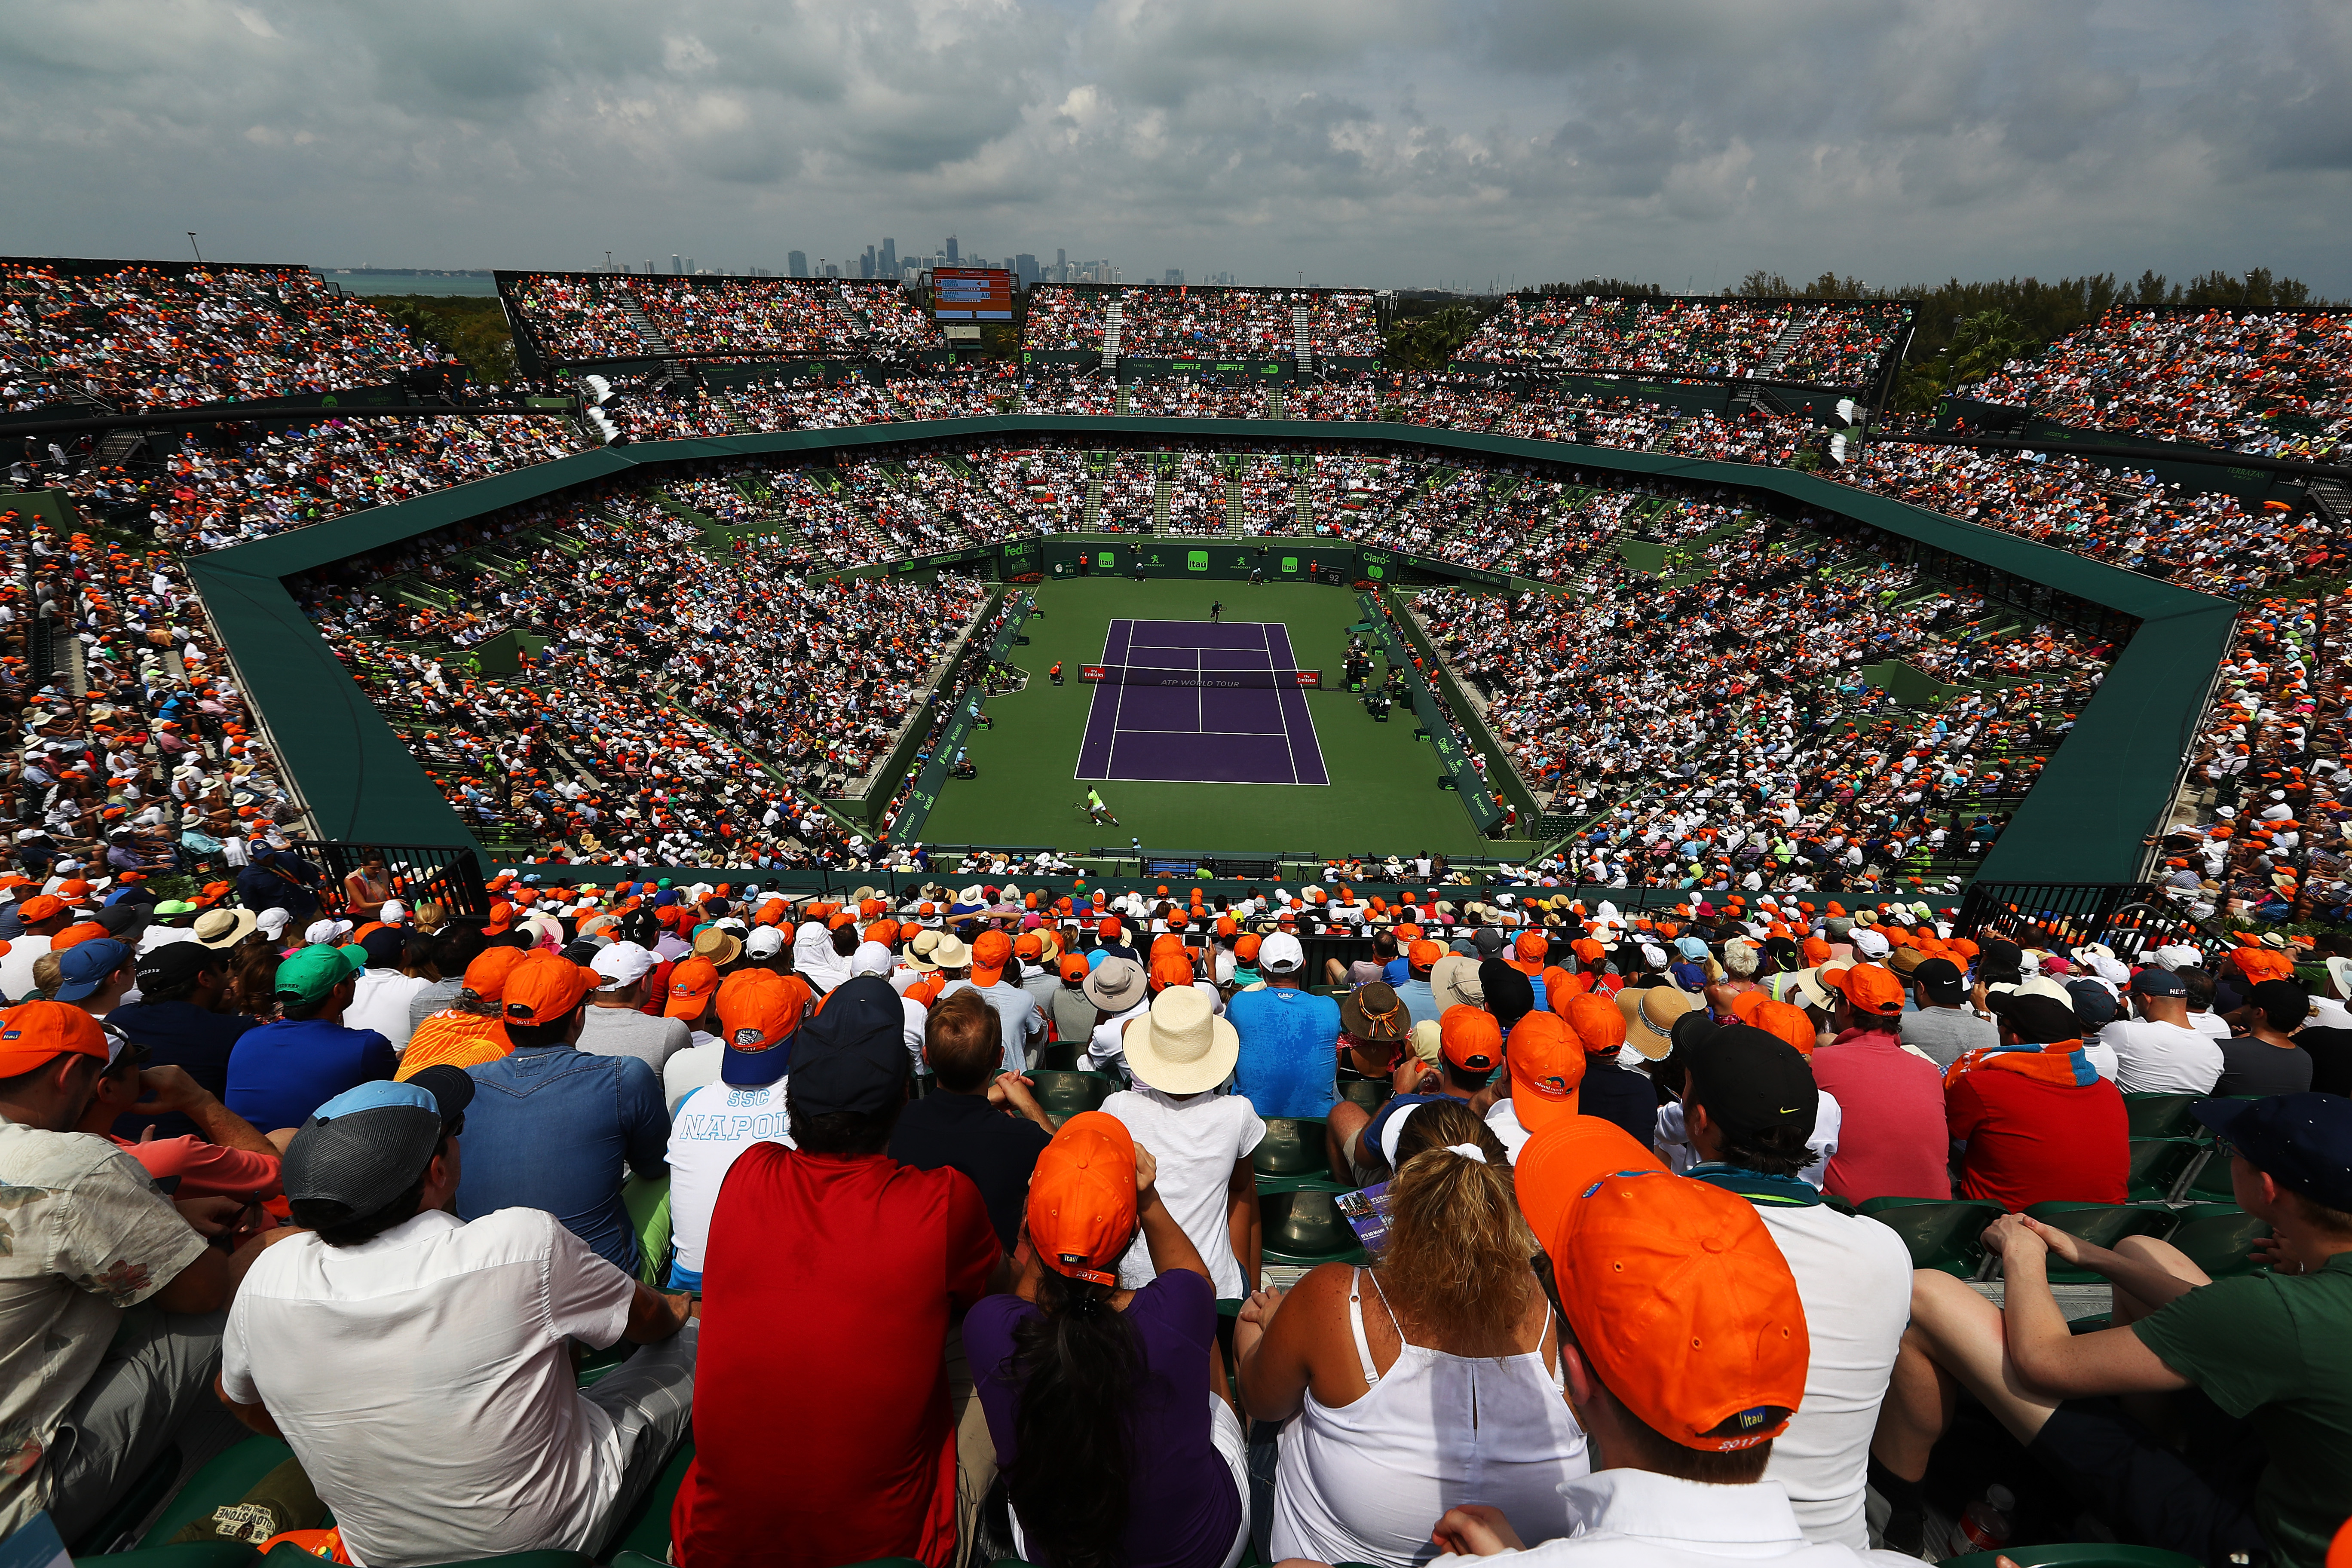 A general view of the match between Roger Federer and Rafael Nadal during the Men's Final of the 2017 Miami Open in Key Biscayne.